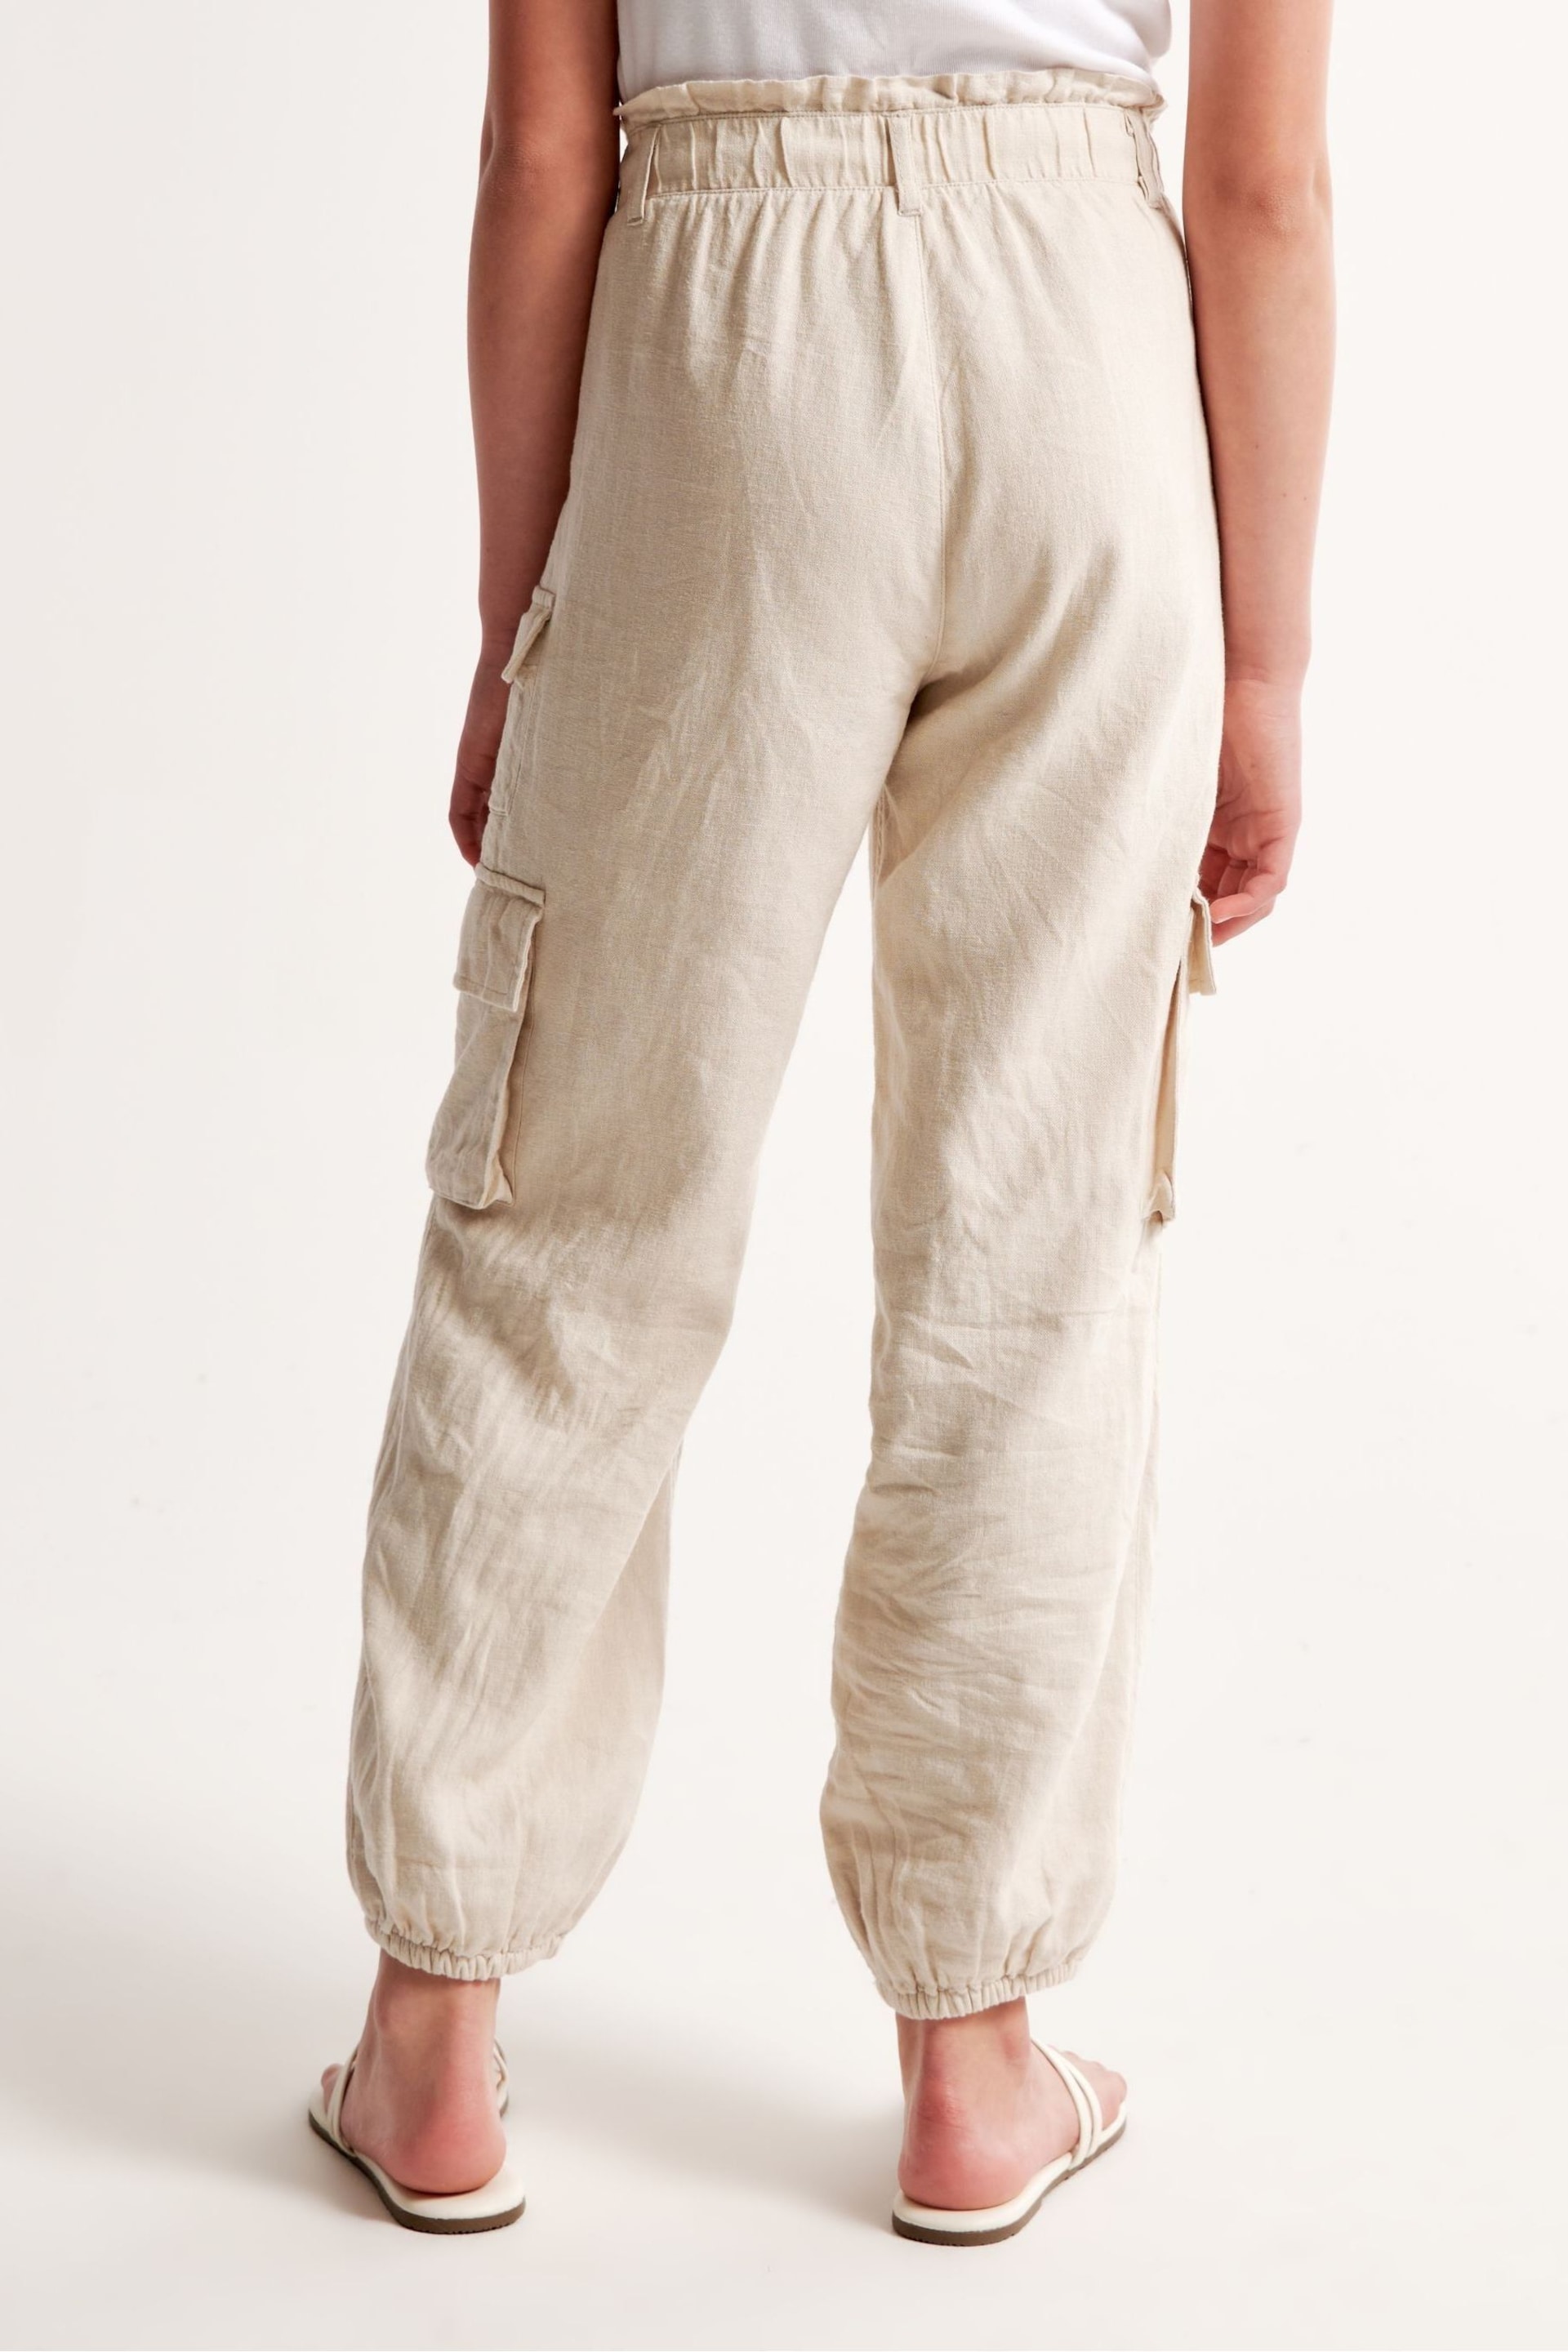 Abercrombie & Fitch Cream Linen Cargo Joggers With Pockets - Image 2 of 7